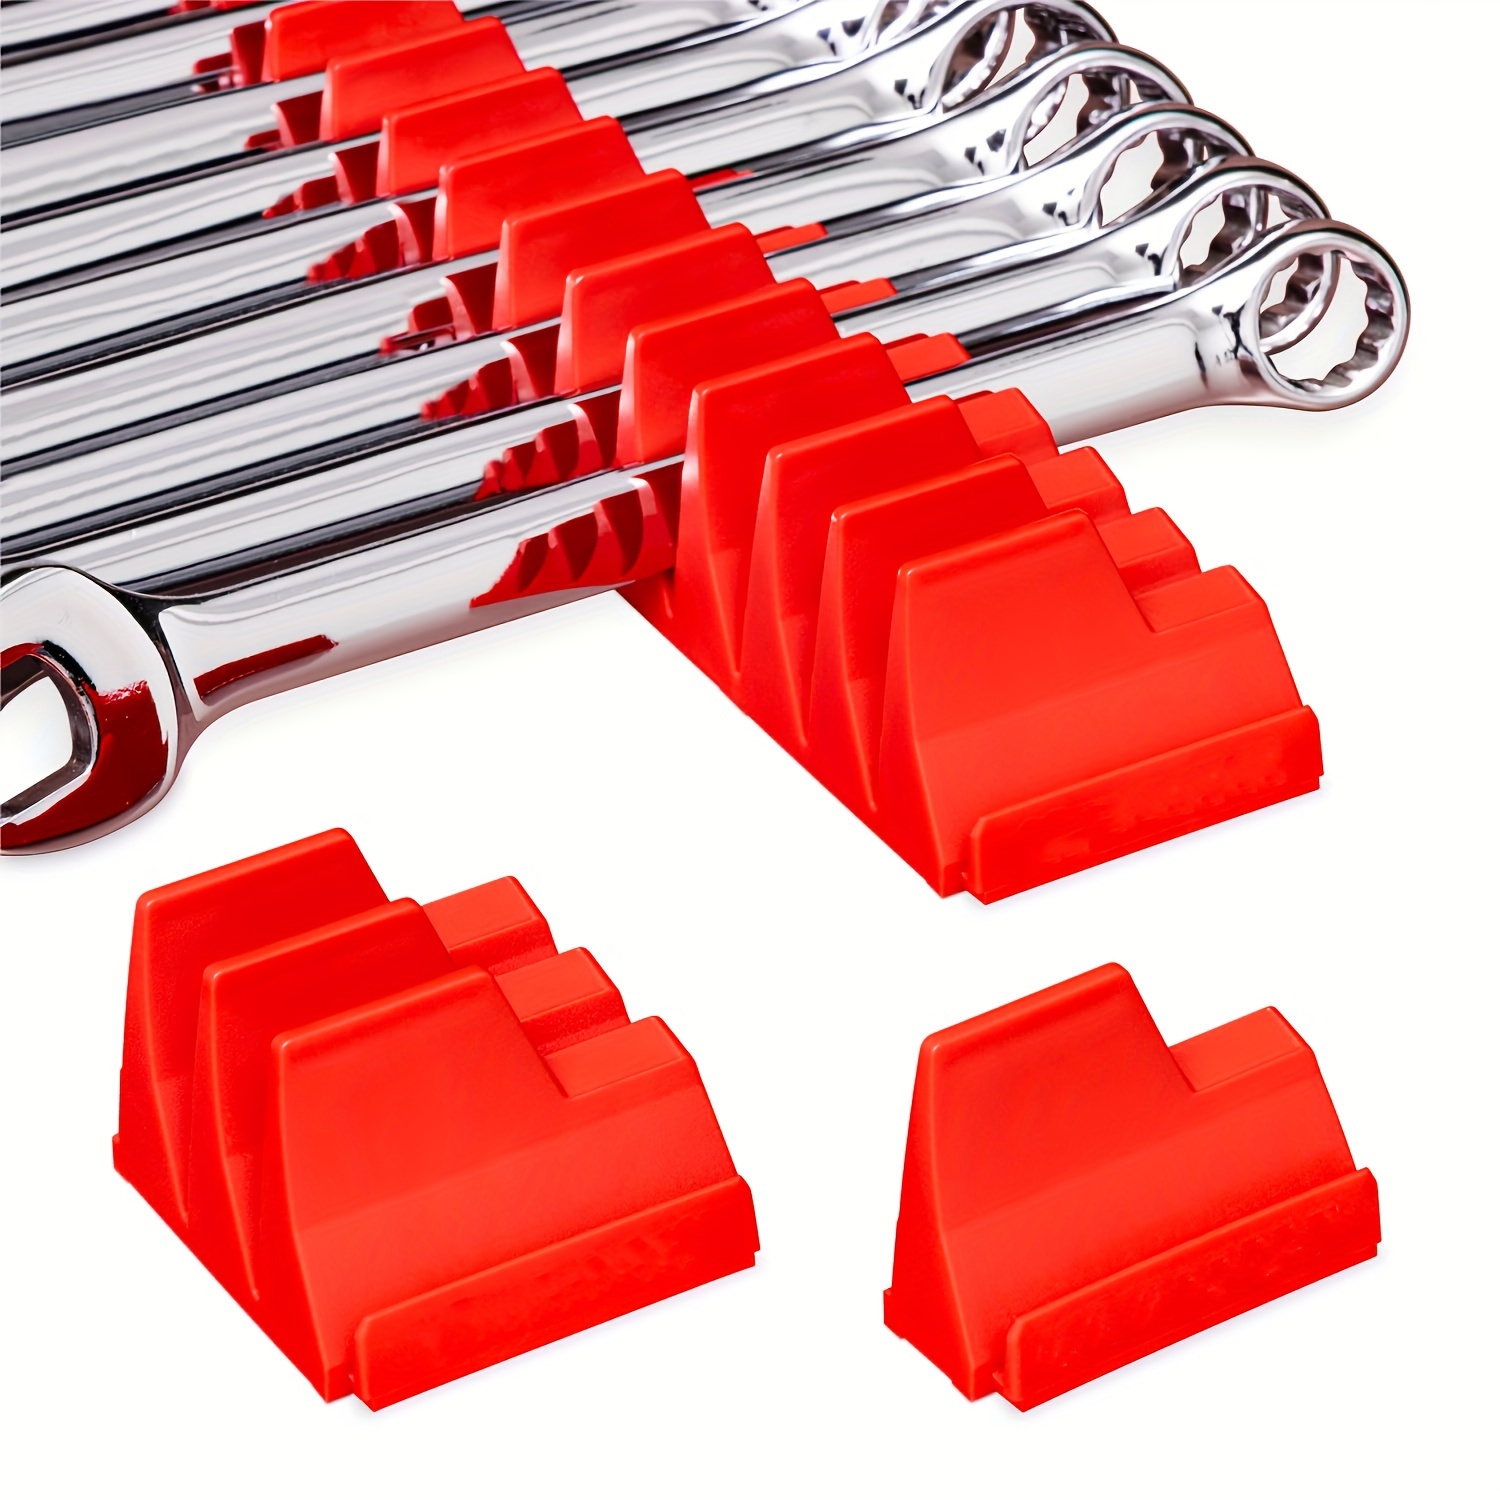 

20-pack Premium Wrench Organizer - Magnetic Hex Head Storage, Durable Toolbox Holder For Repair Tools